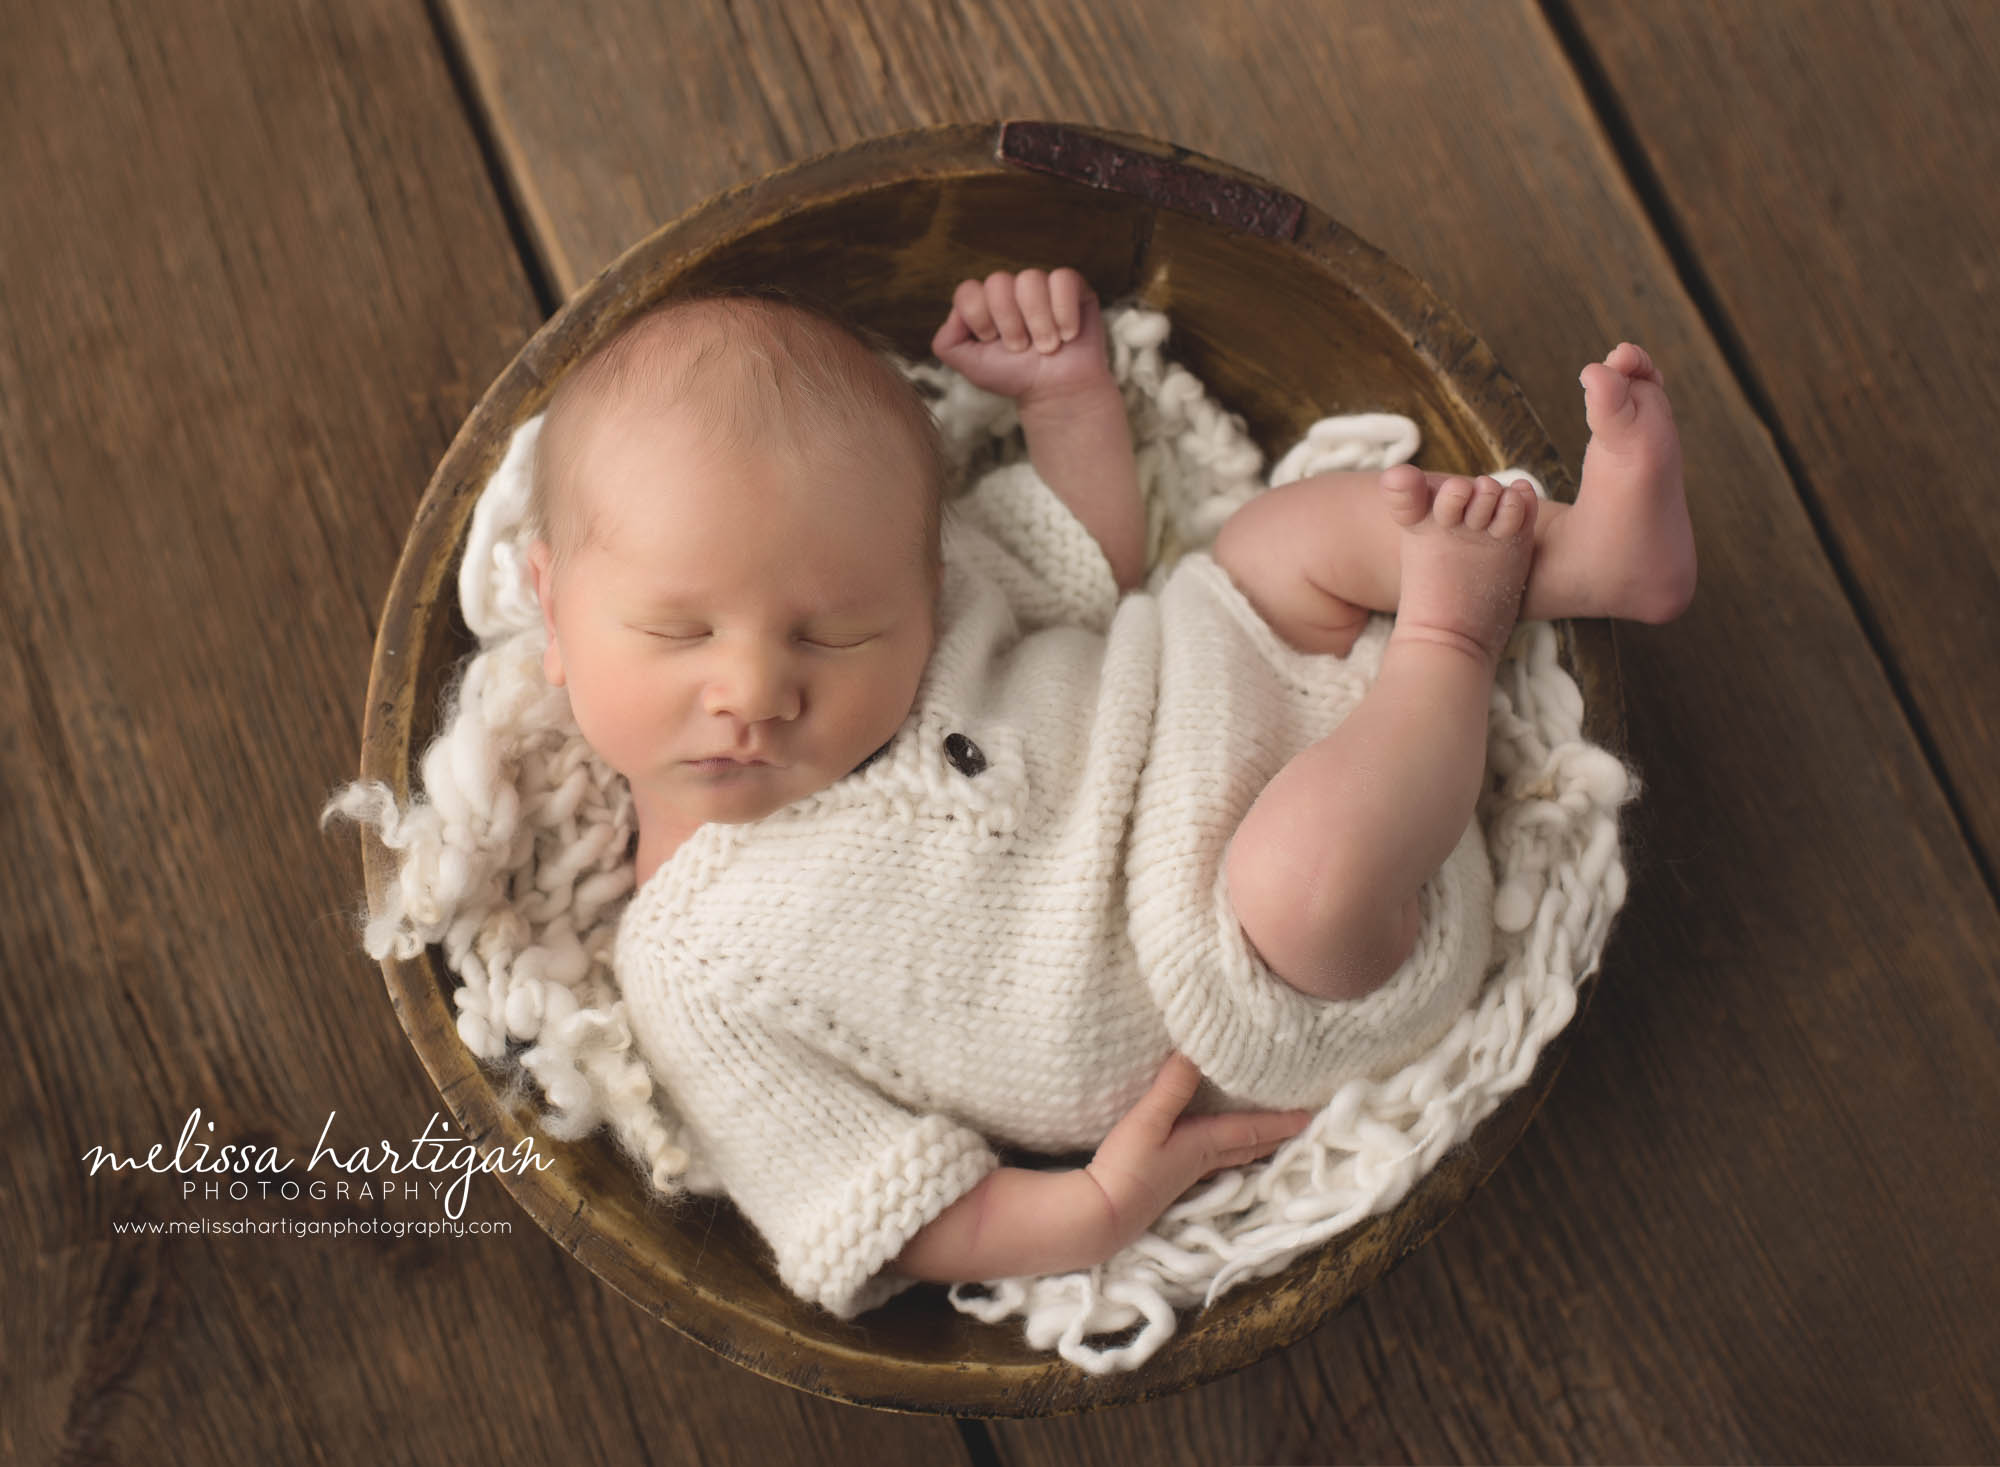 newborn baby boy wearing knitted outfit in wooden round bowl with cream layer fluff Connecticut Newborn Photographers